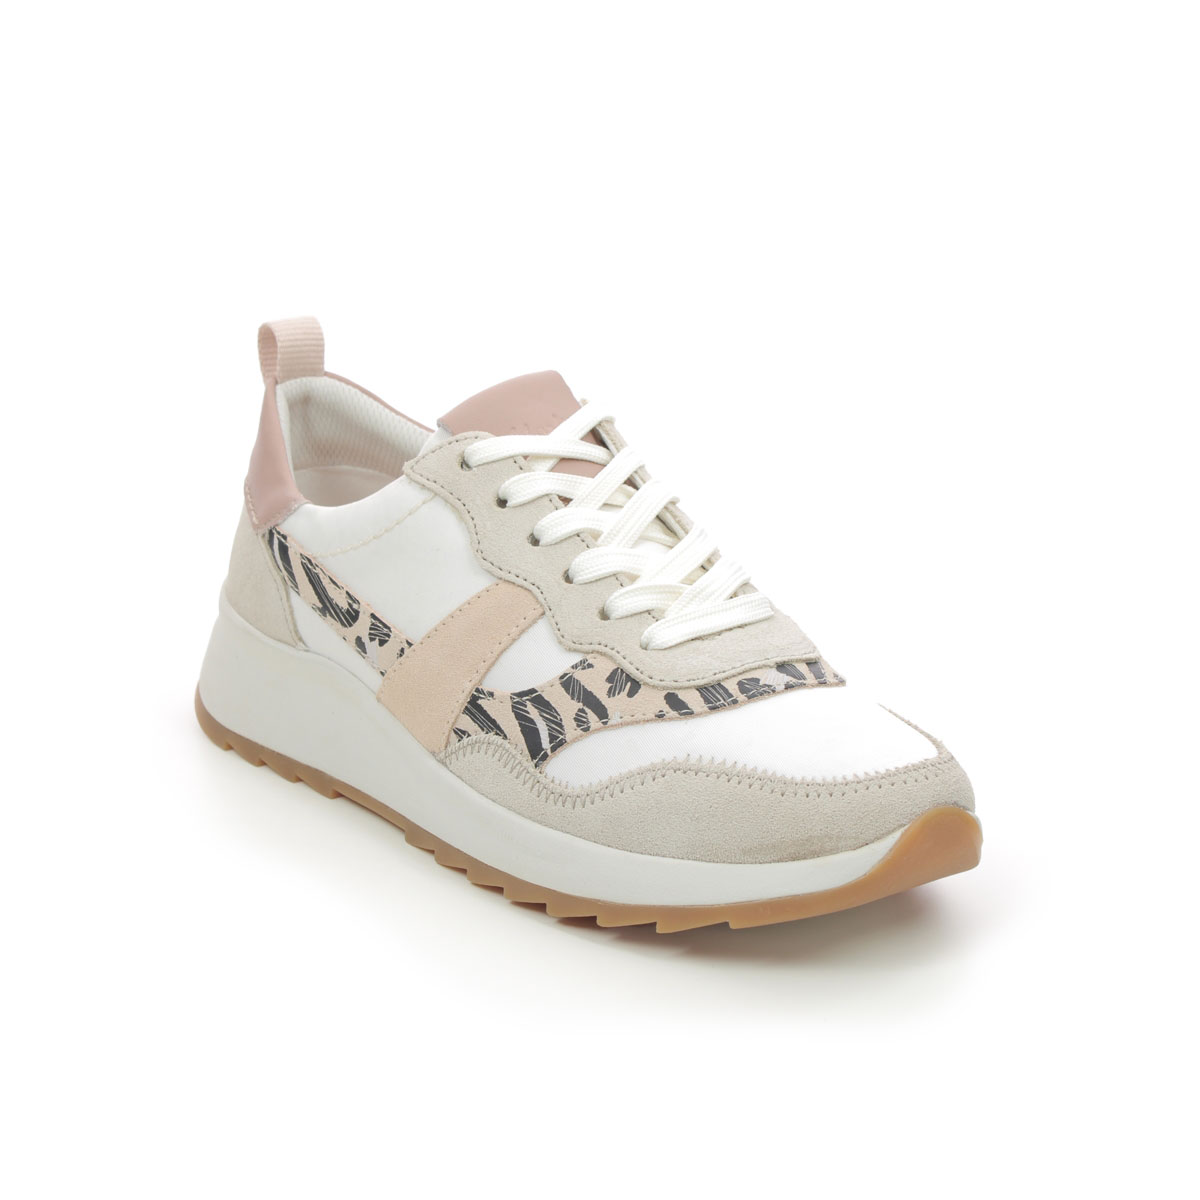 Clarks Dashlite Jazz White Pink Womens Trainers 704294D In Size 5 In Plain White Pink